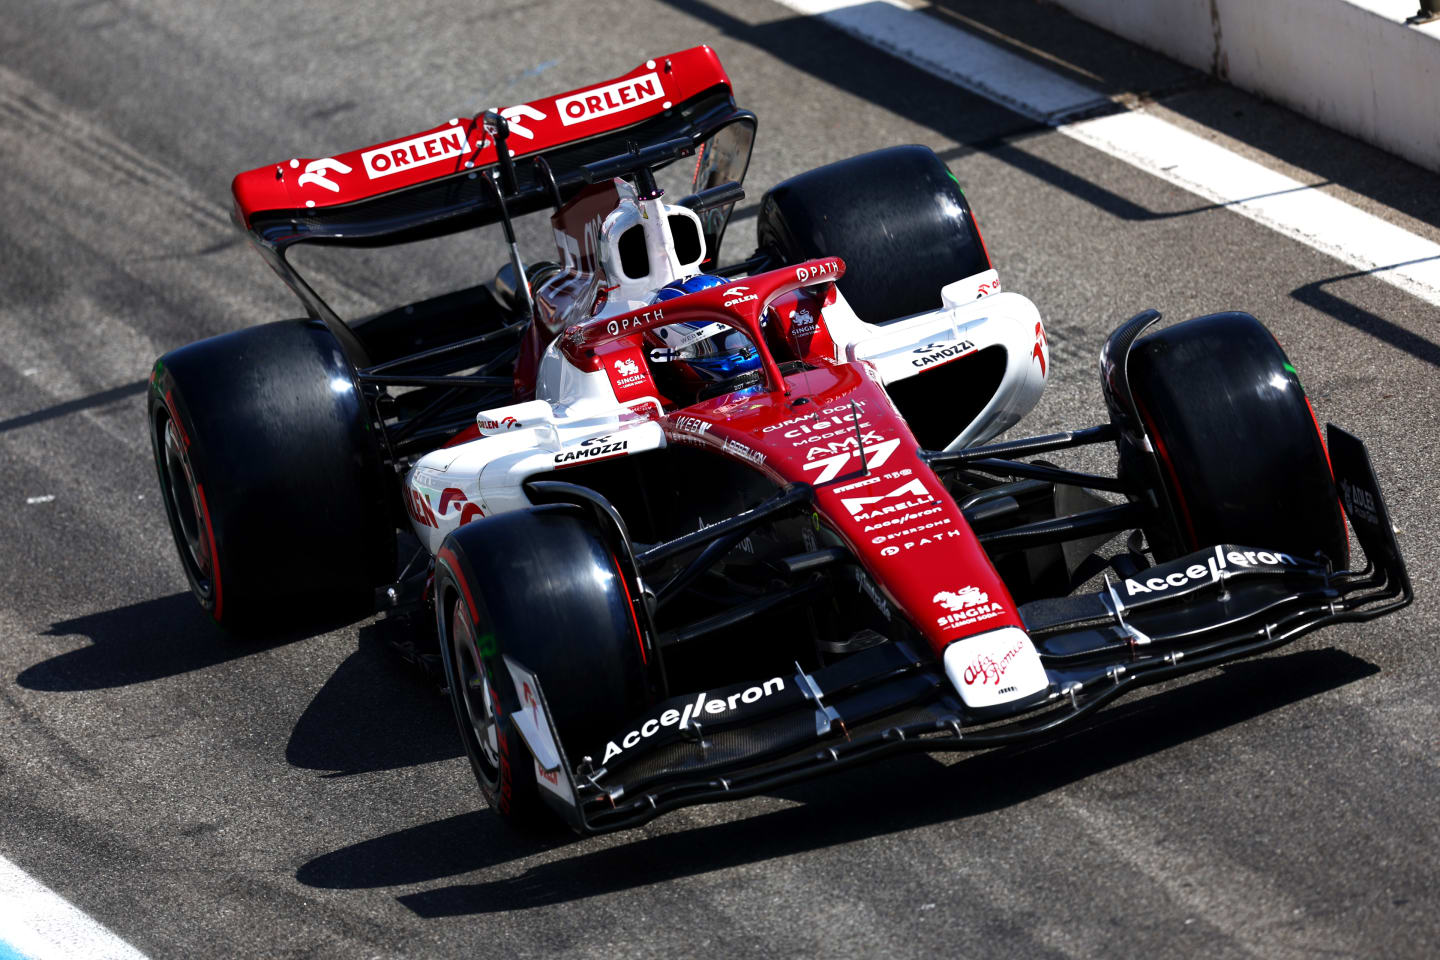 LE CASTELLET, FRANCE - JULY 23: Valtteri Bottas of Finland driving the (77) Alfa Romeo F1 C42 Ferrari in the pitlane during qualifying ahead of the F1 Grand Prix of France at Circuit Paul Ricard on July 23, 2022 in Le Castellet, France. (Photo by Clive Rose/Getty Images)